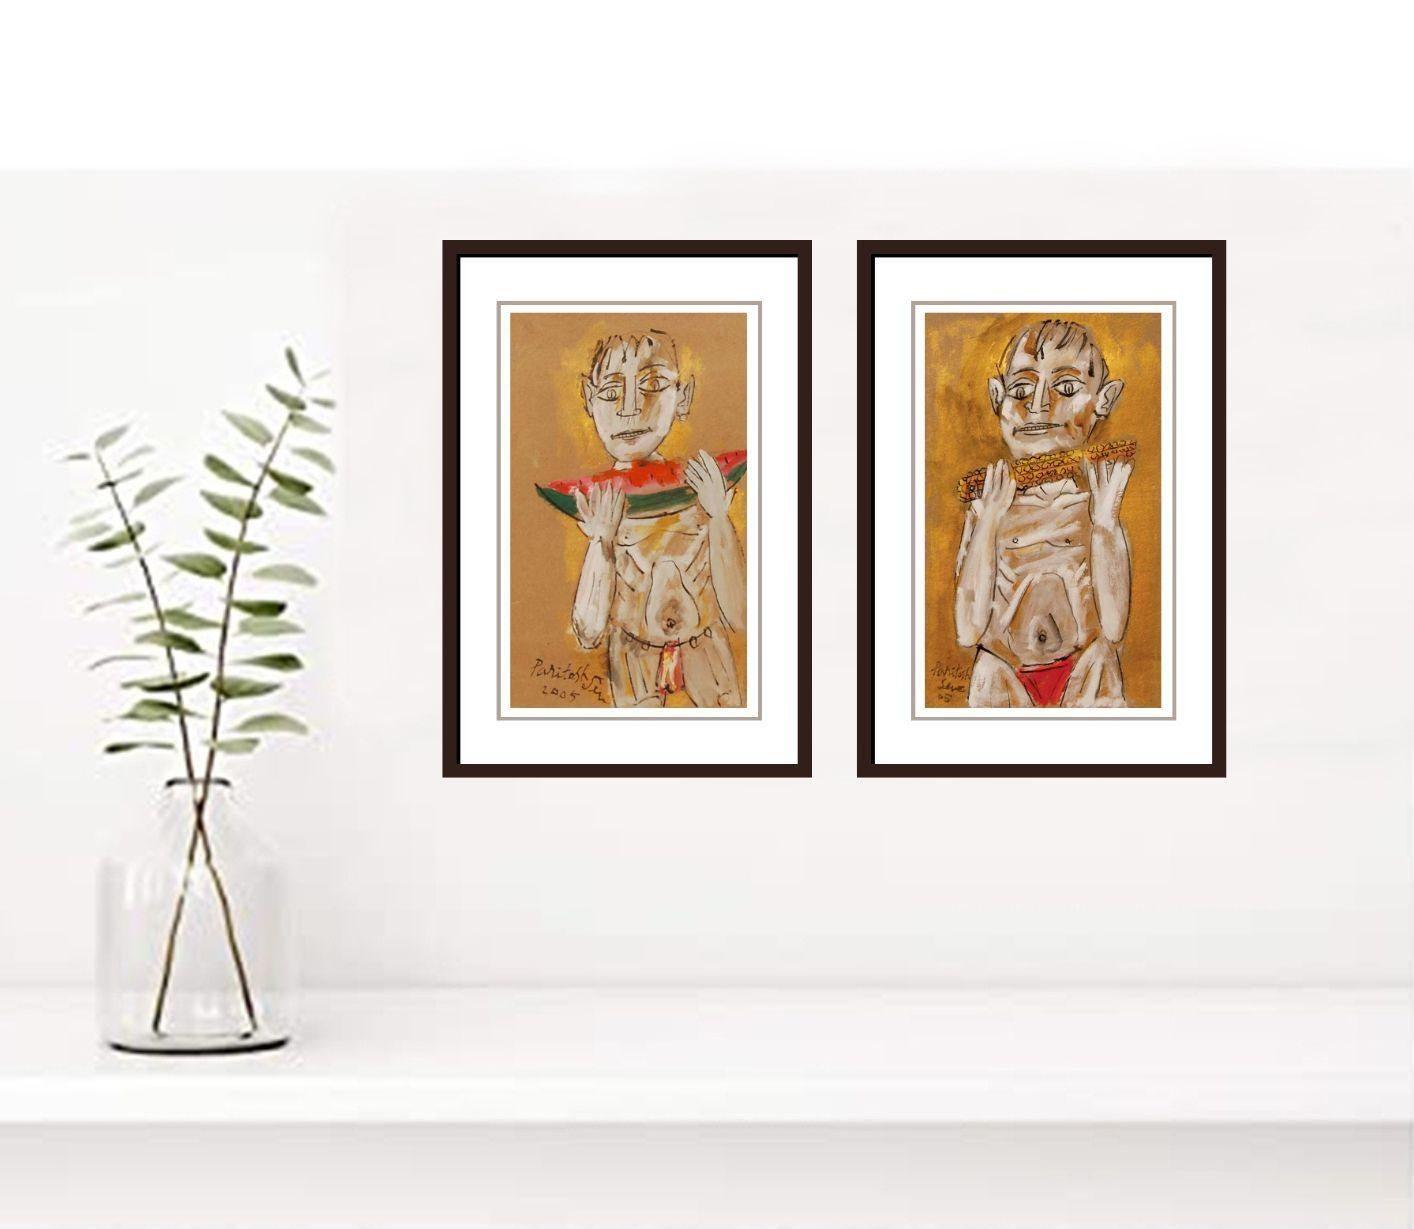 Boy eating fruit and corn
By Great Modern Indian Artist Paritosh Sen 
Size 20 x 12 inches each (unframed size)
Acrylic and Mixed Media on board
( Set of 2 works )
Inclusive of shipment in unframed form.

( An ecelectic pair of two boys, by the